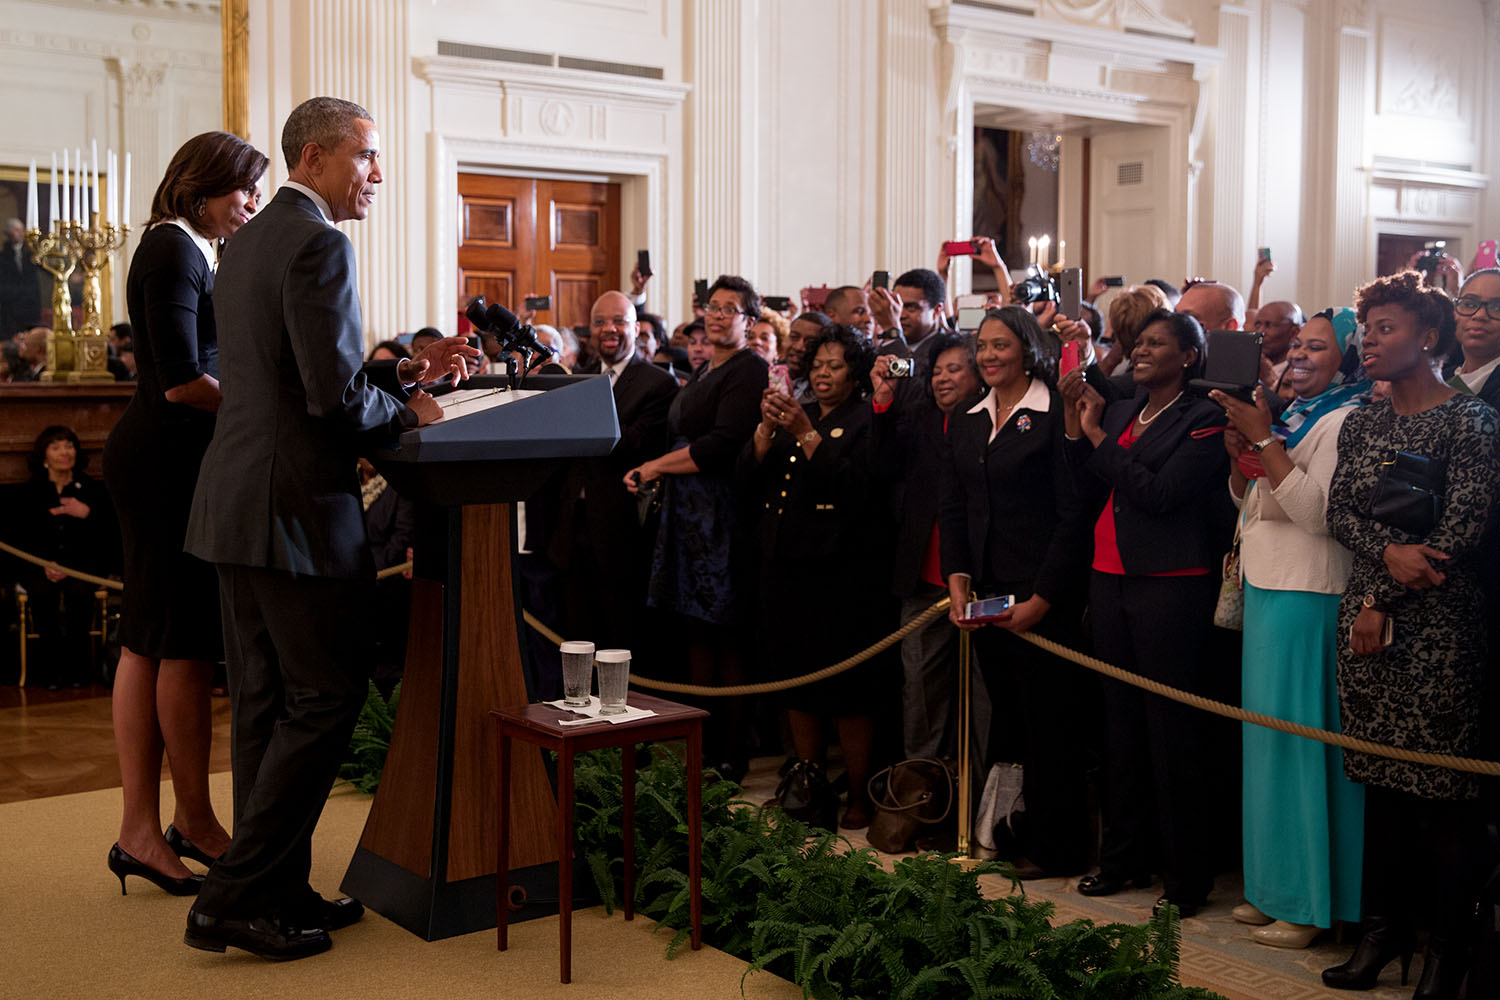 President Obama, with First Lady Michelle Obama, delivers remarks during a reception celebrating Black History Month